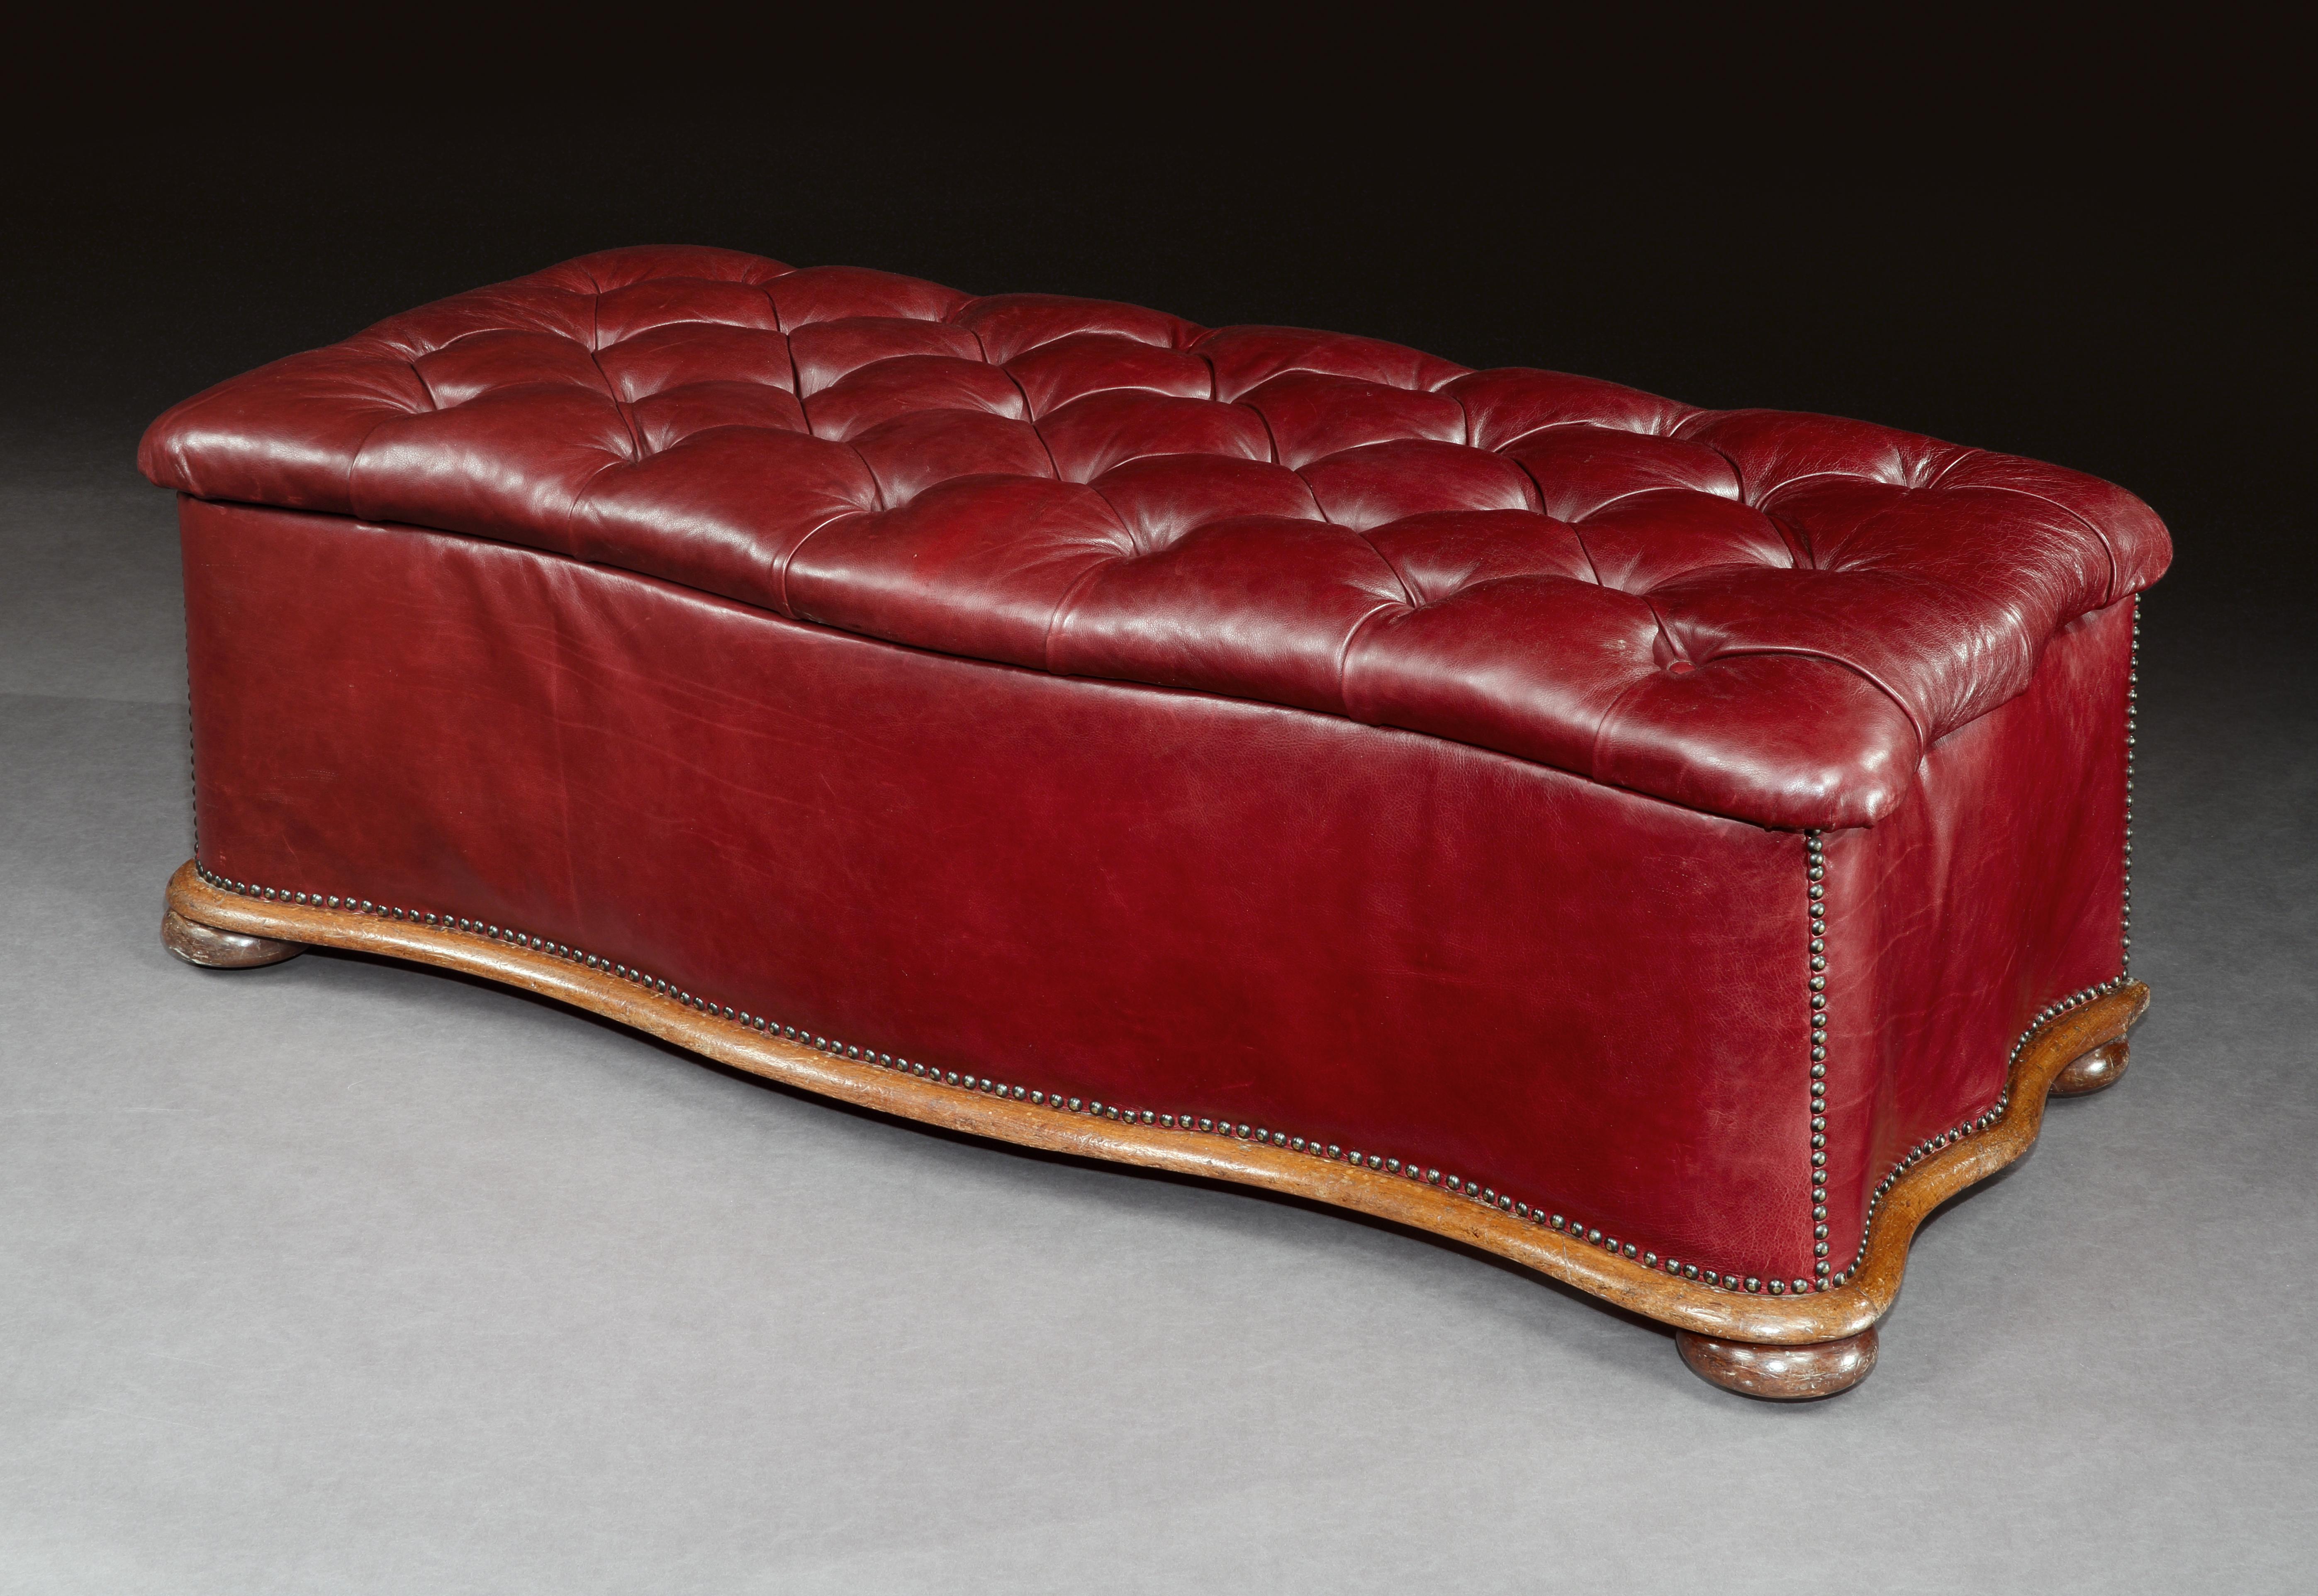 Serpentine-shaped ottoman, mid-19th century, English, Victorian, with mahogany skirt and feet and upholstered in burgundy leather

This handsome ottoman is really practical offering both seating and storage space. It is traditionally upholstered